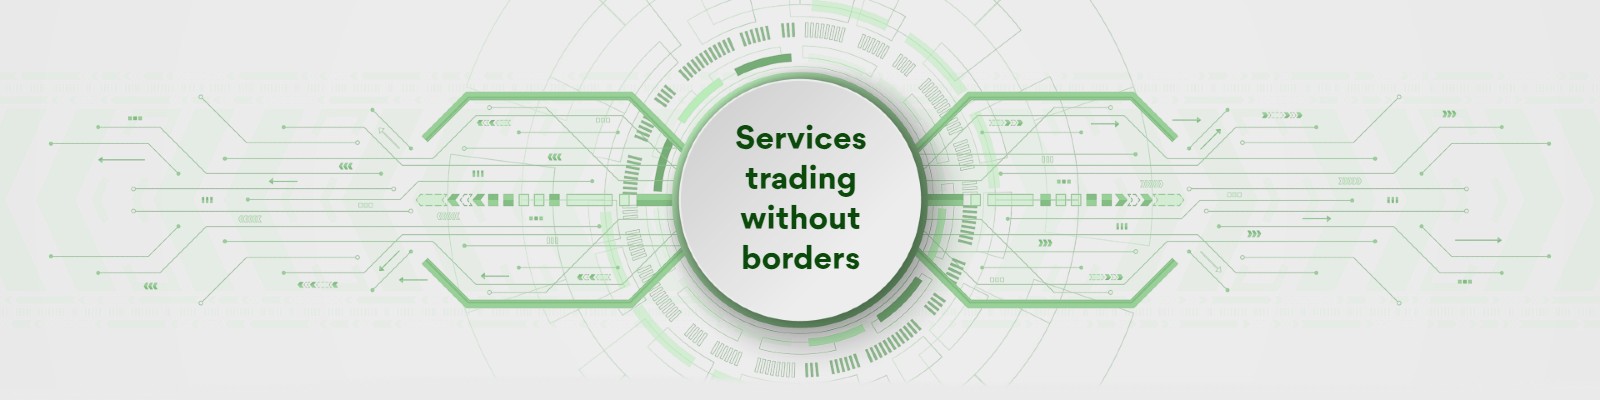 Services trading without borders